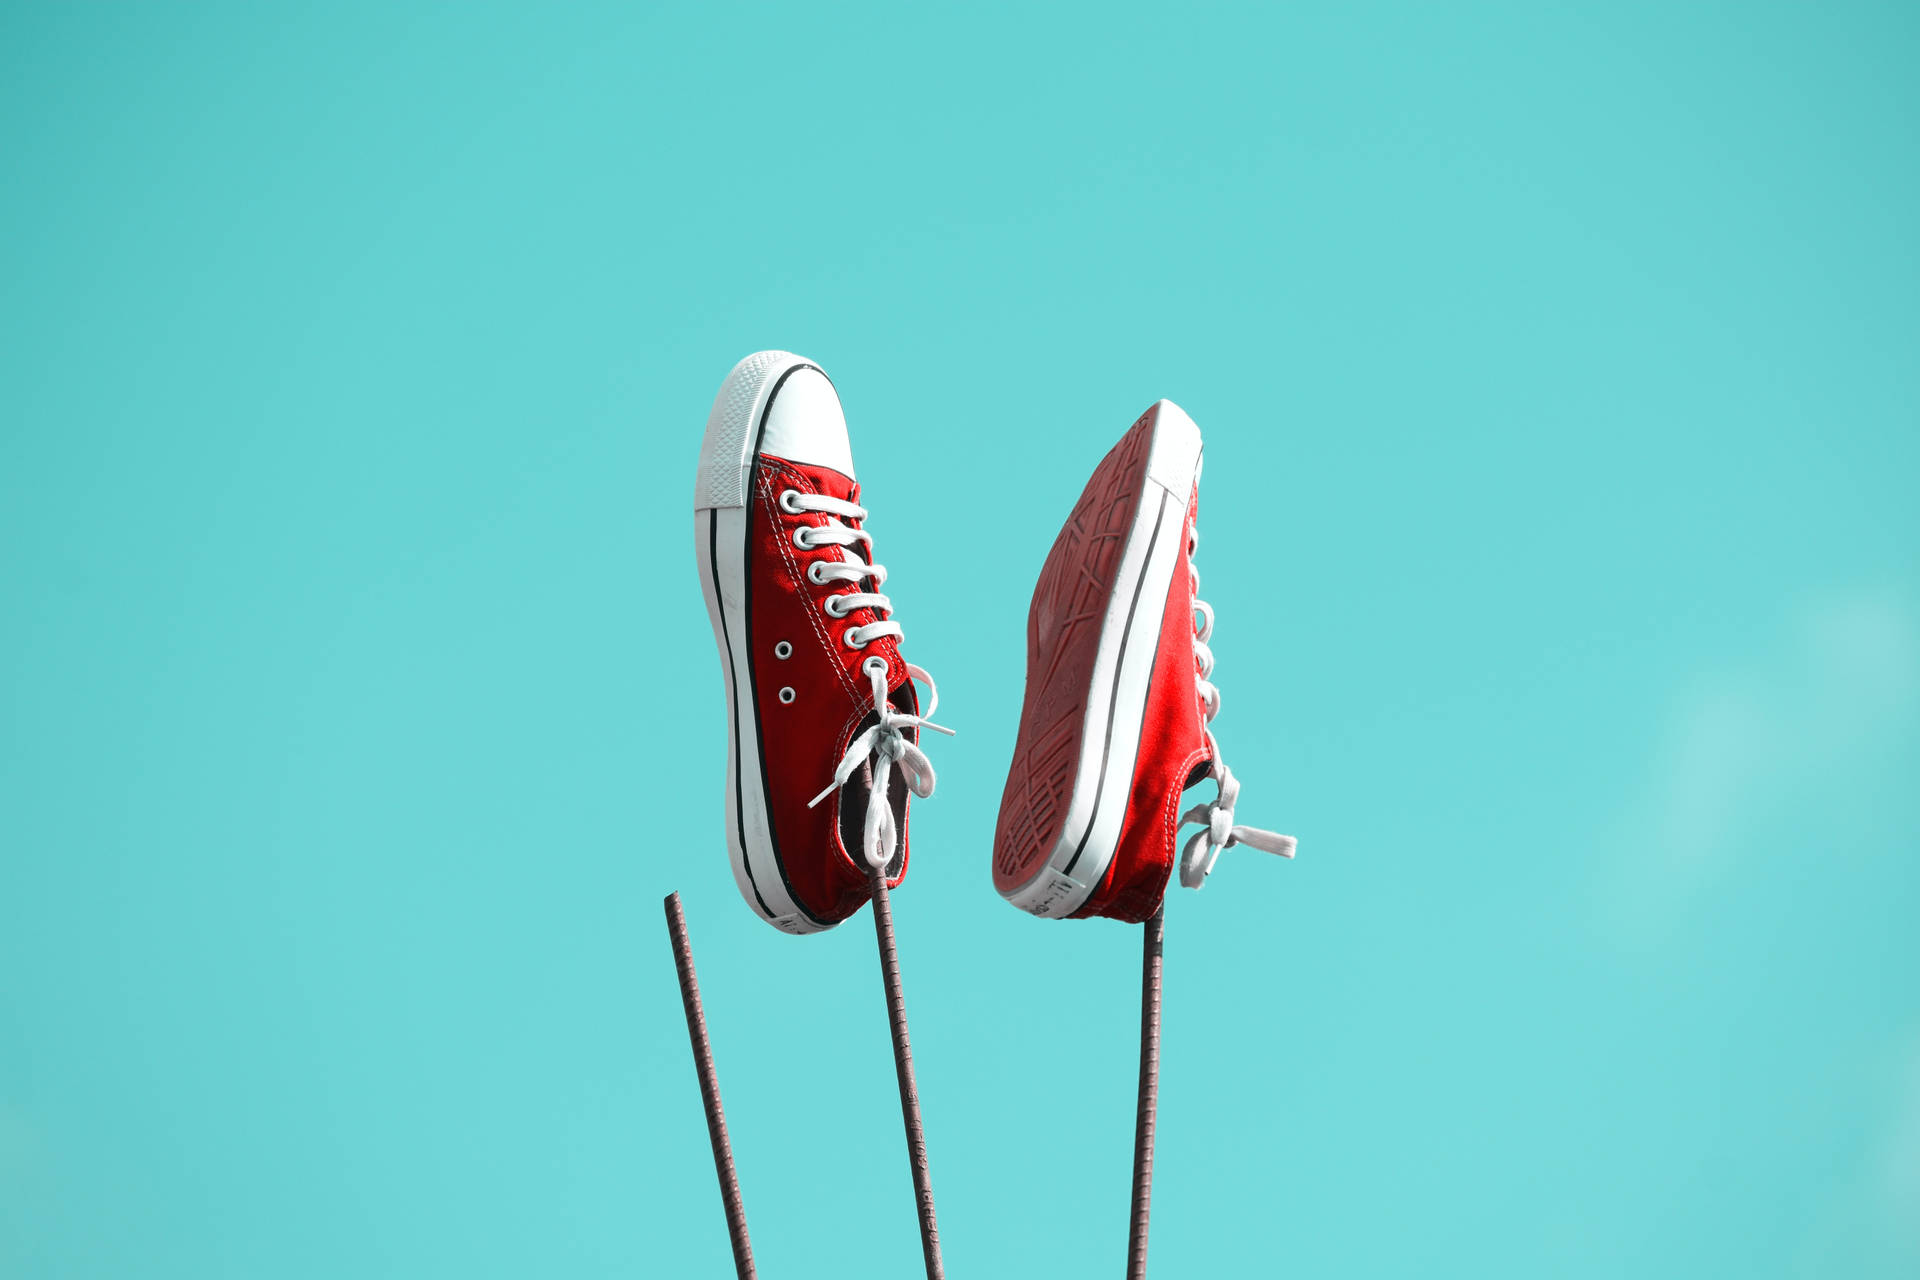 Red Converse Shoes Against Iron Bars Wallpaper